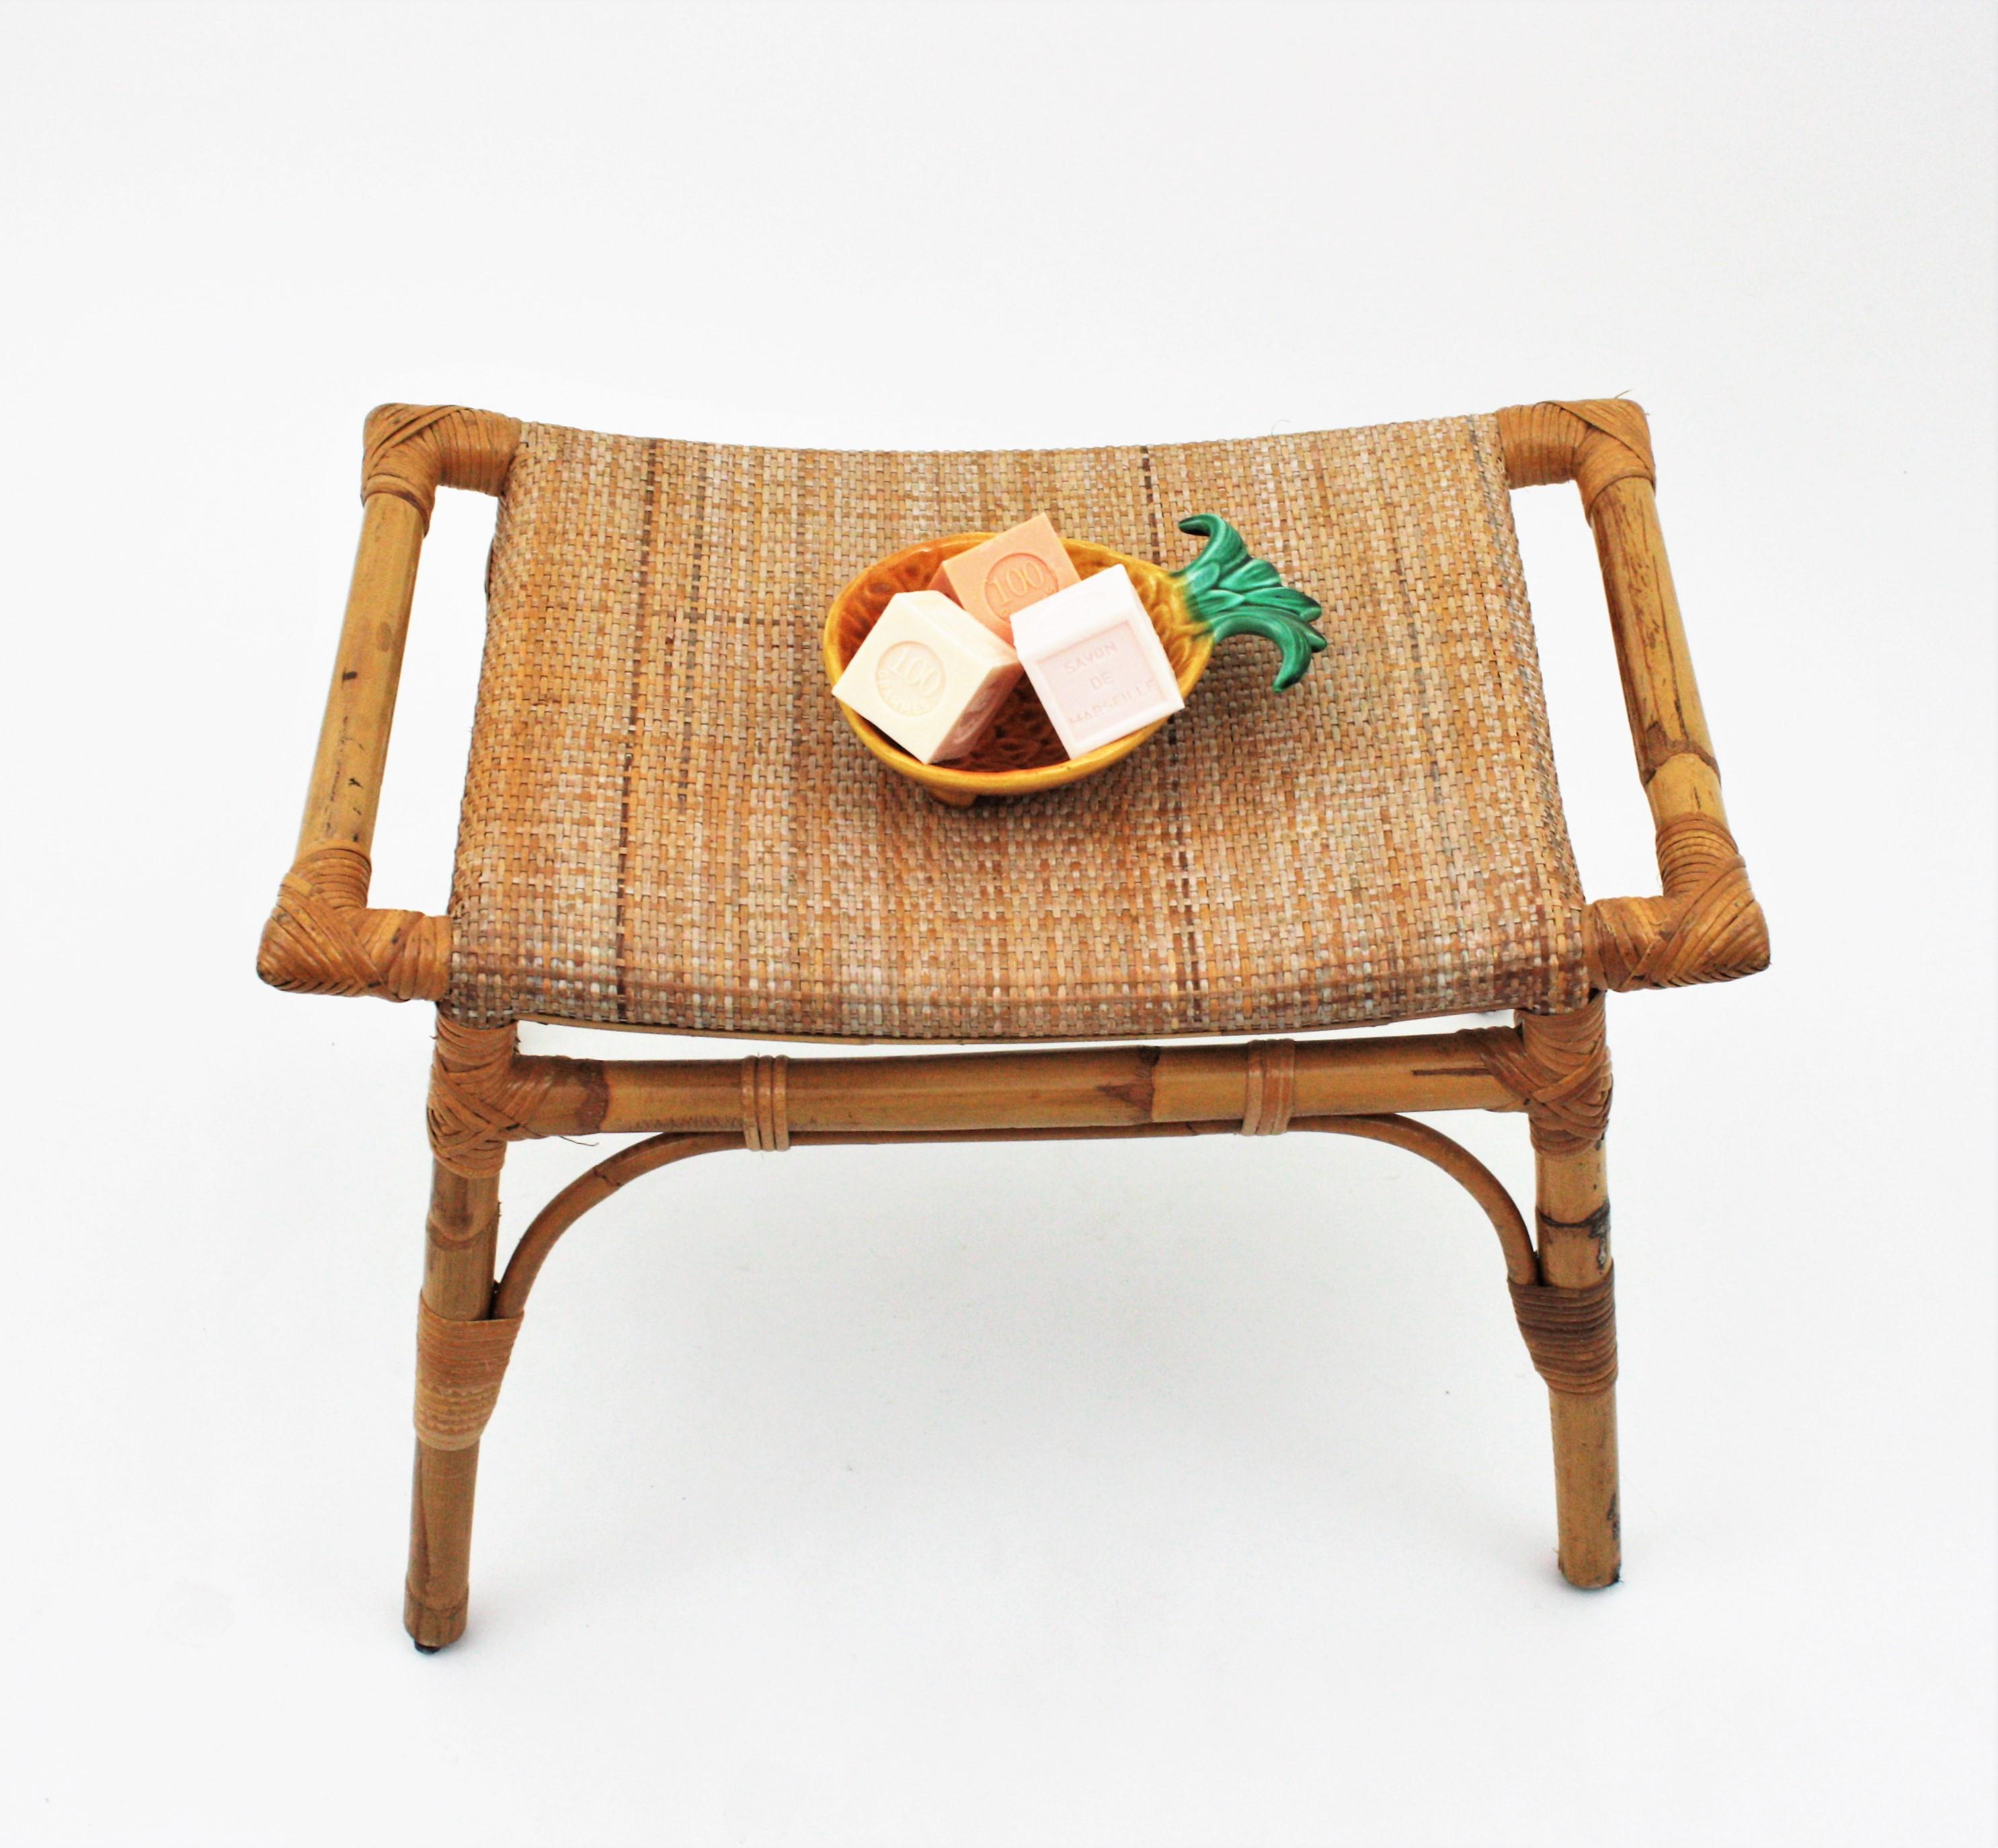 Bamboo Stool, Ottoman or Bench with Cane Seat 11